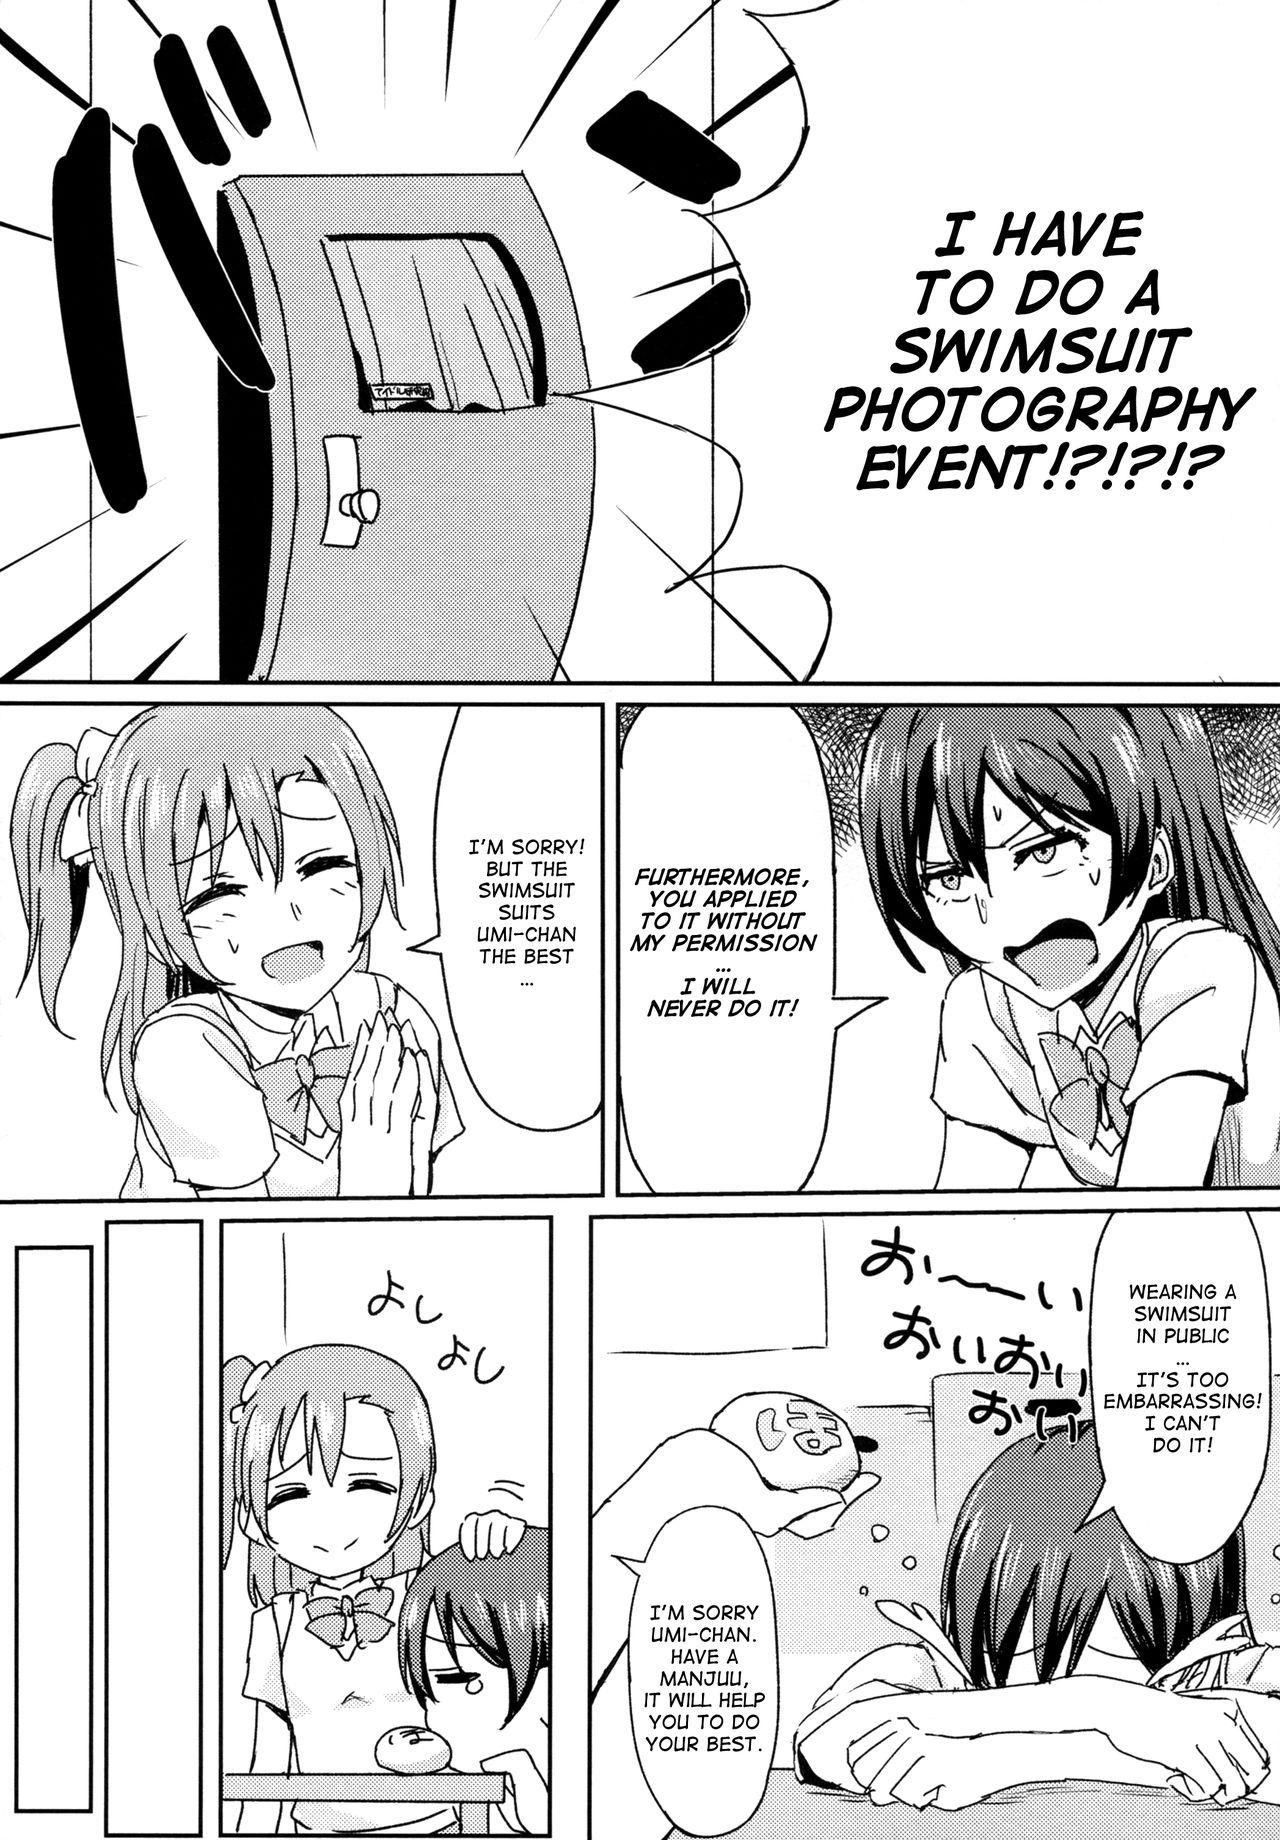 Kitchen Hah,Wrench This! - Love live Tugjob - Page 5